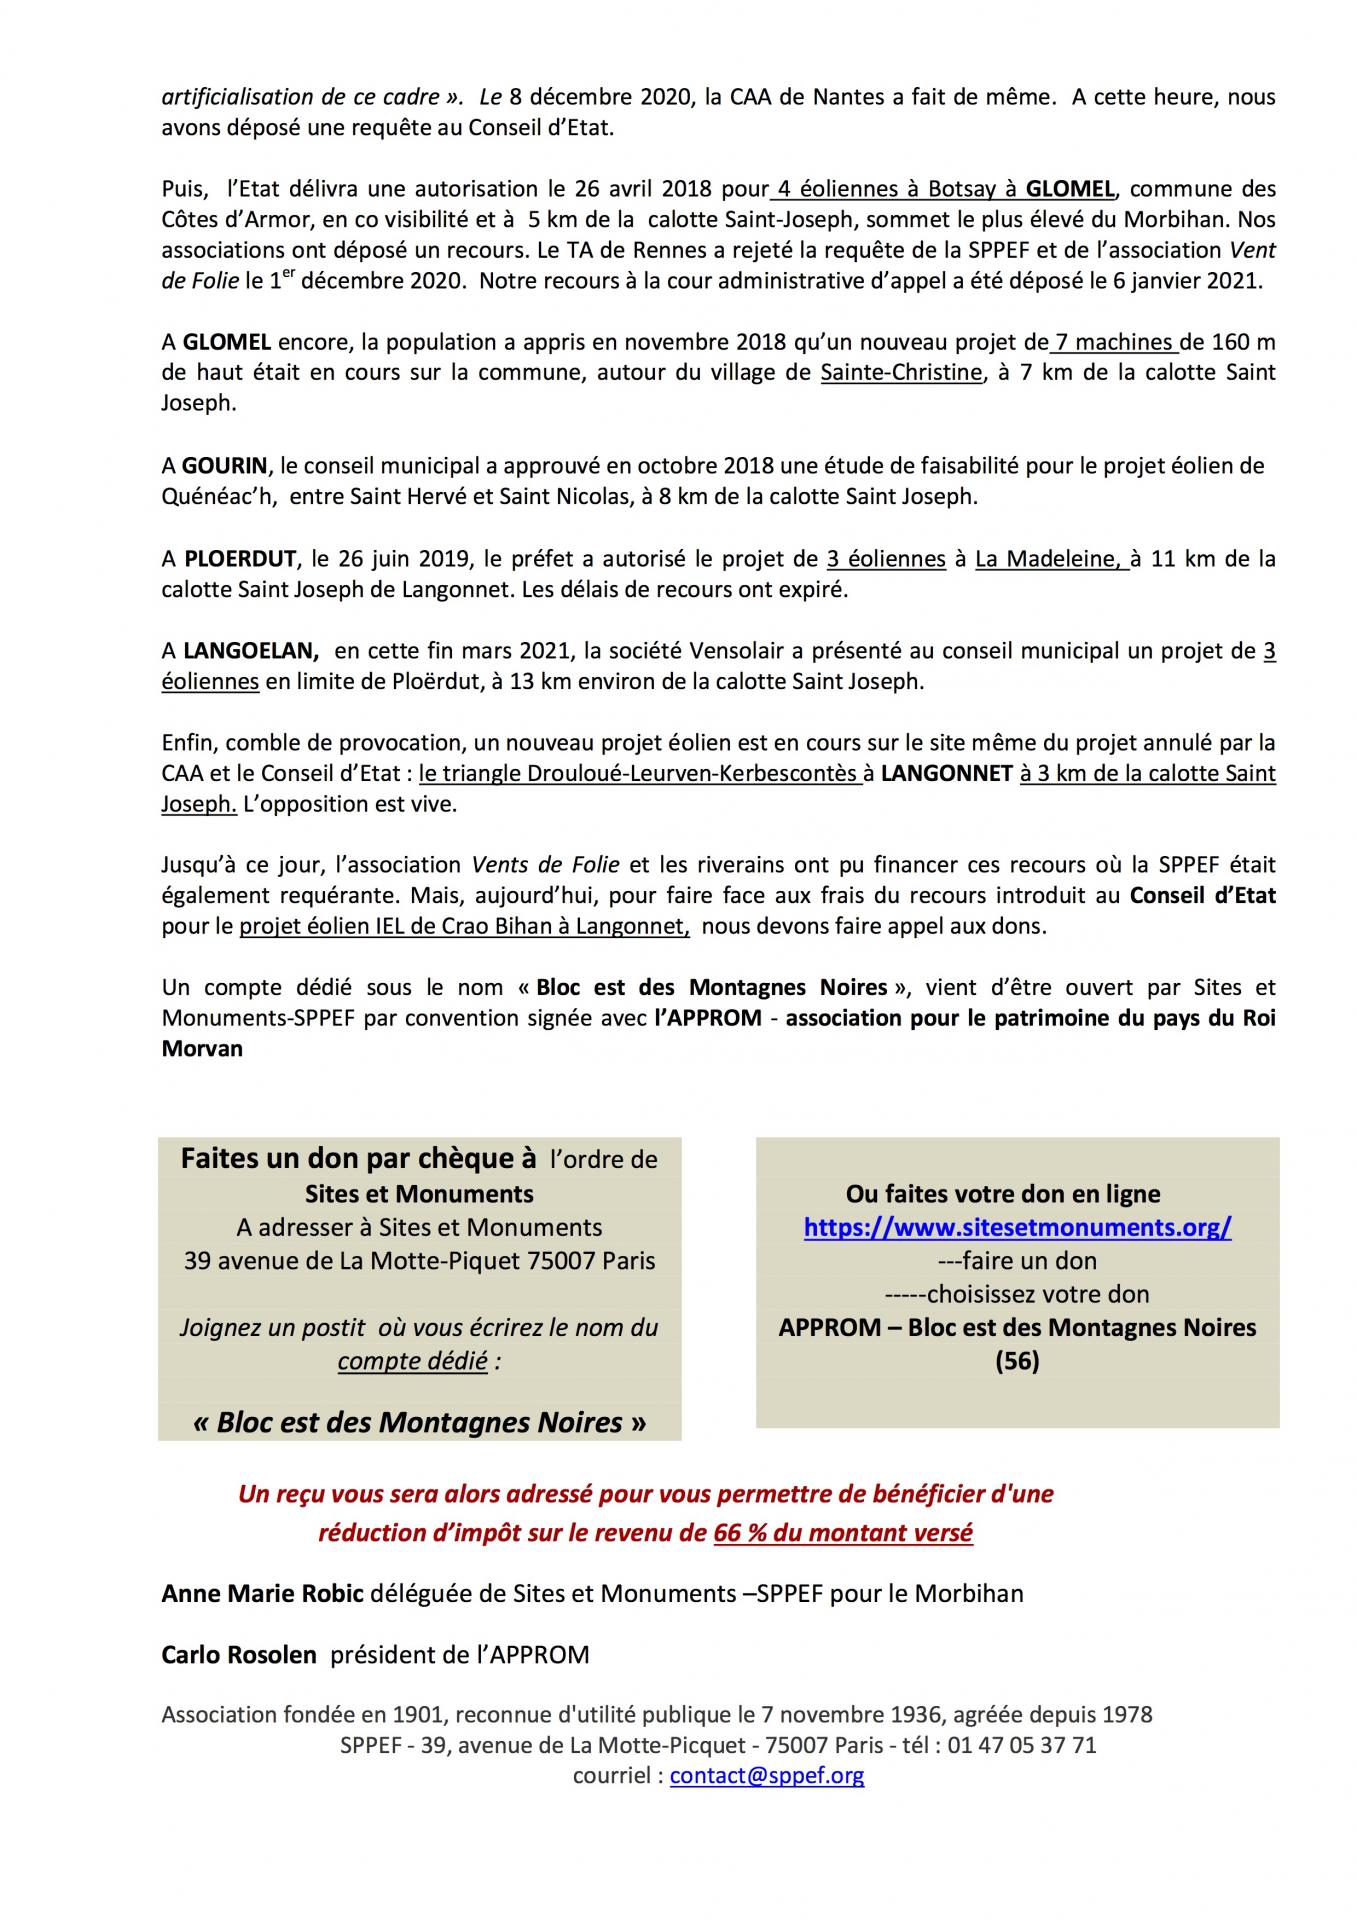 Tract lango approm sppef 2